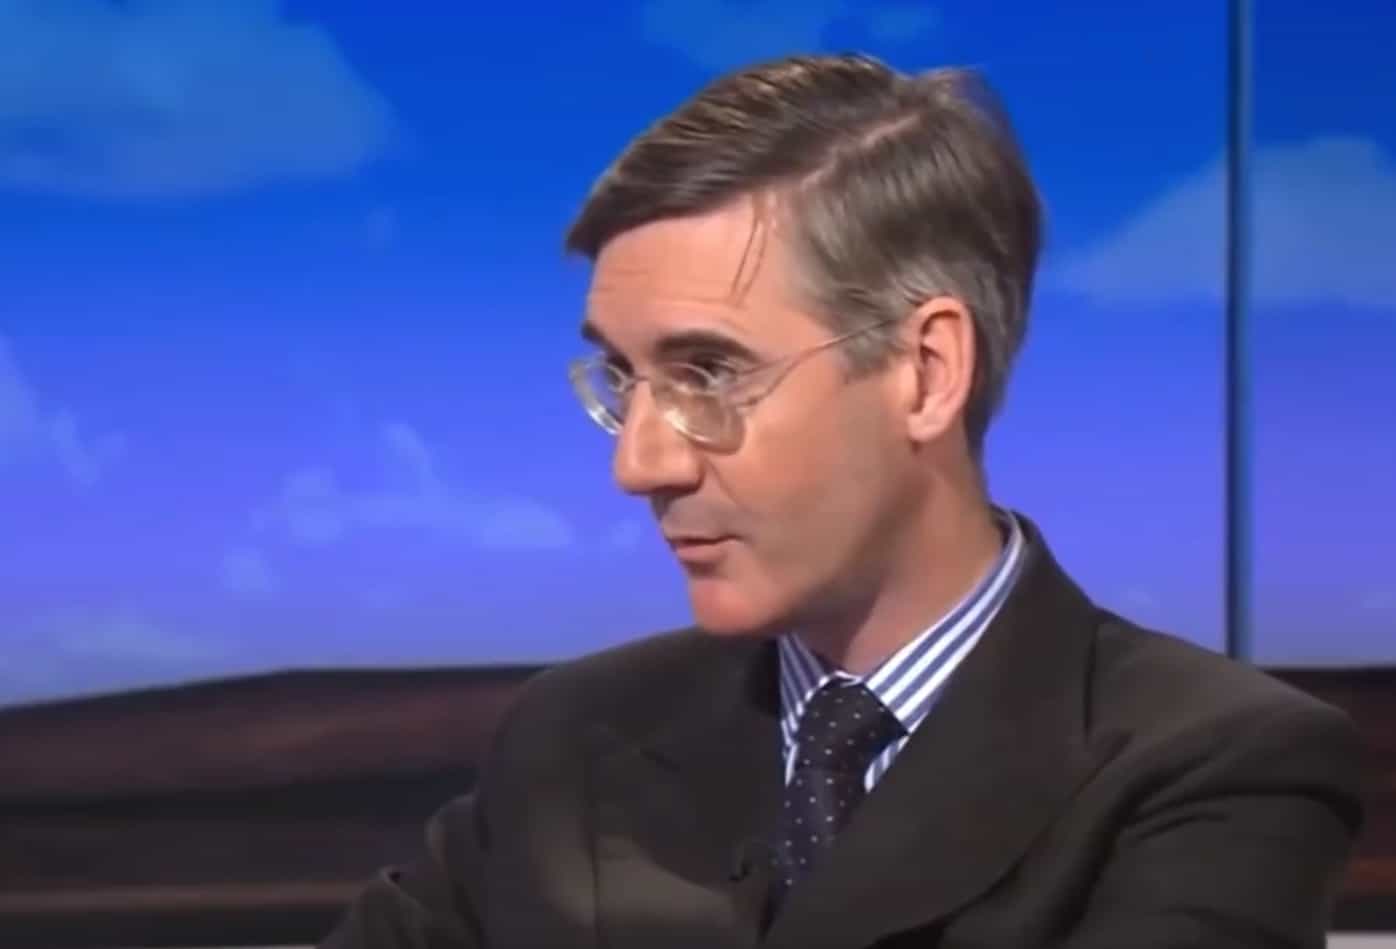 Rees-Mogg says nurses aren’t being paid enough because the NHS wastes money on ‘silly things’